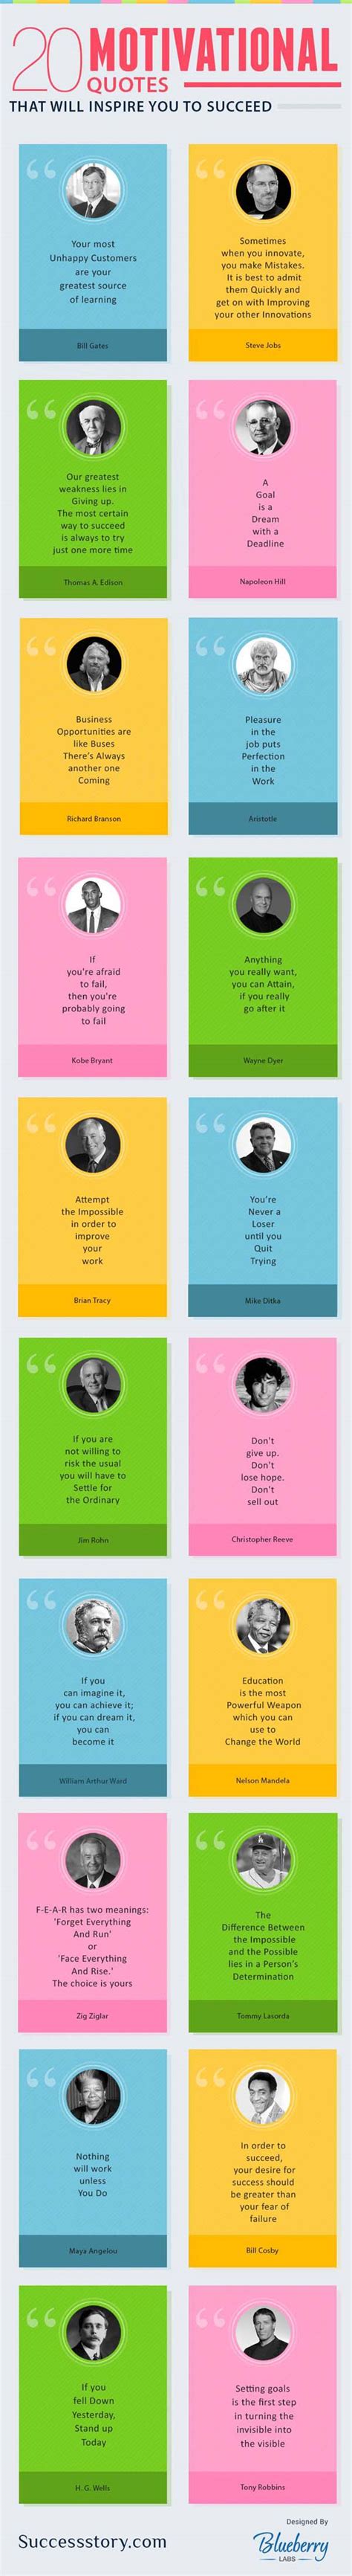 20 Motivational Quotes To Inspire You To Succeed Book Marketing